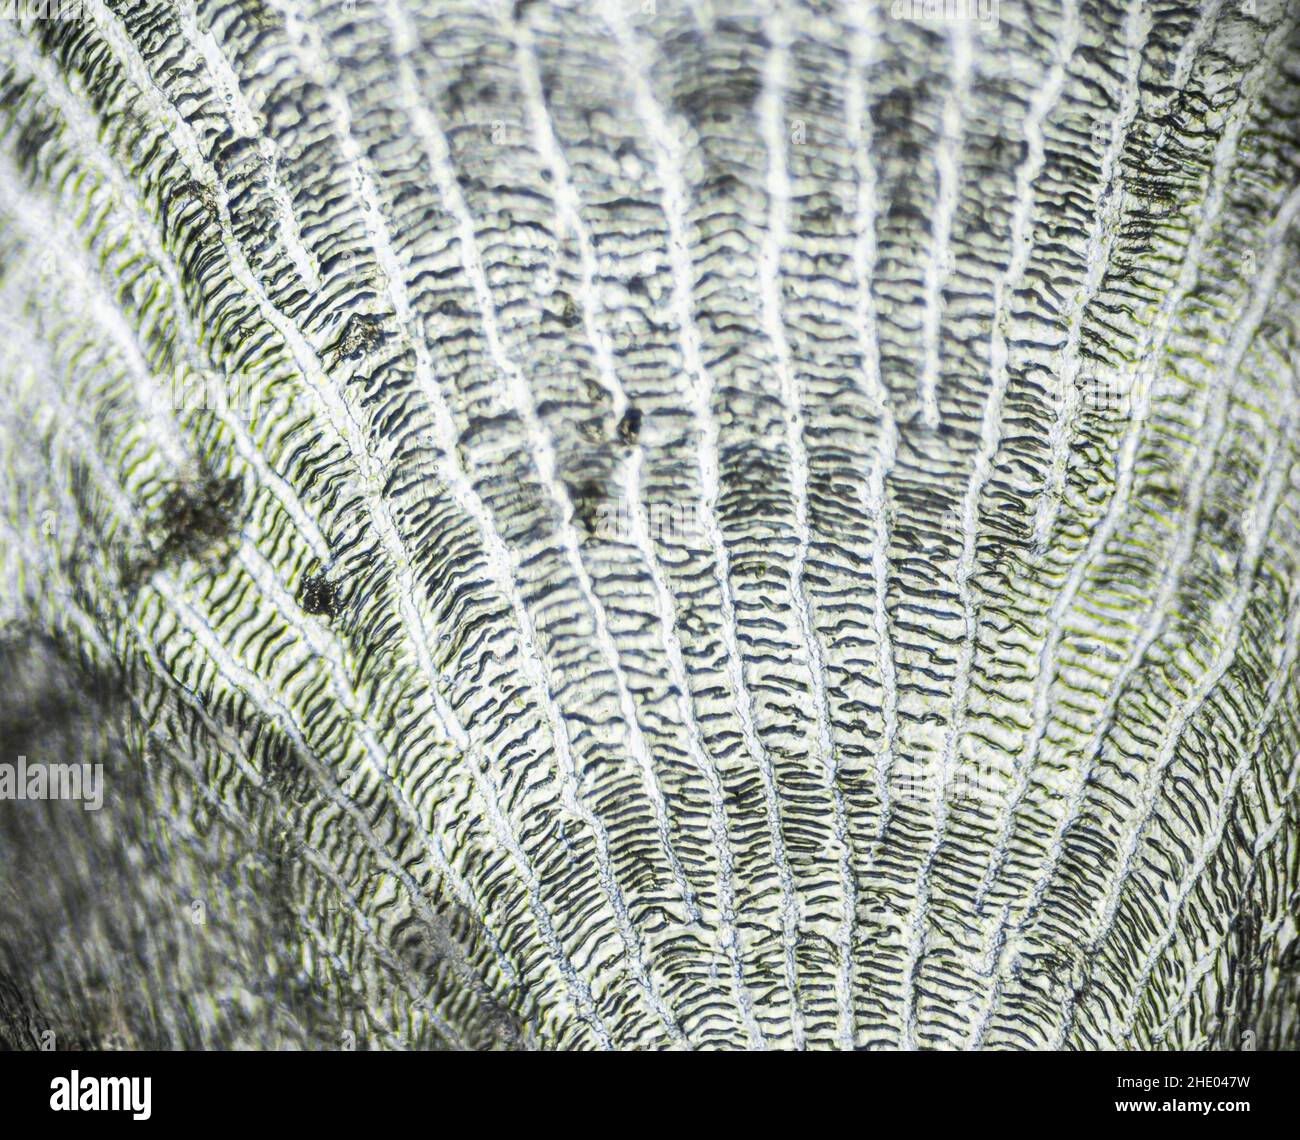 Natural marine fish scale under a microscope, fish scale close up